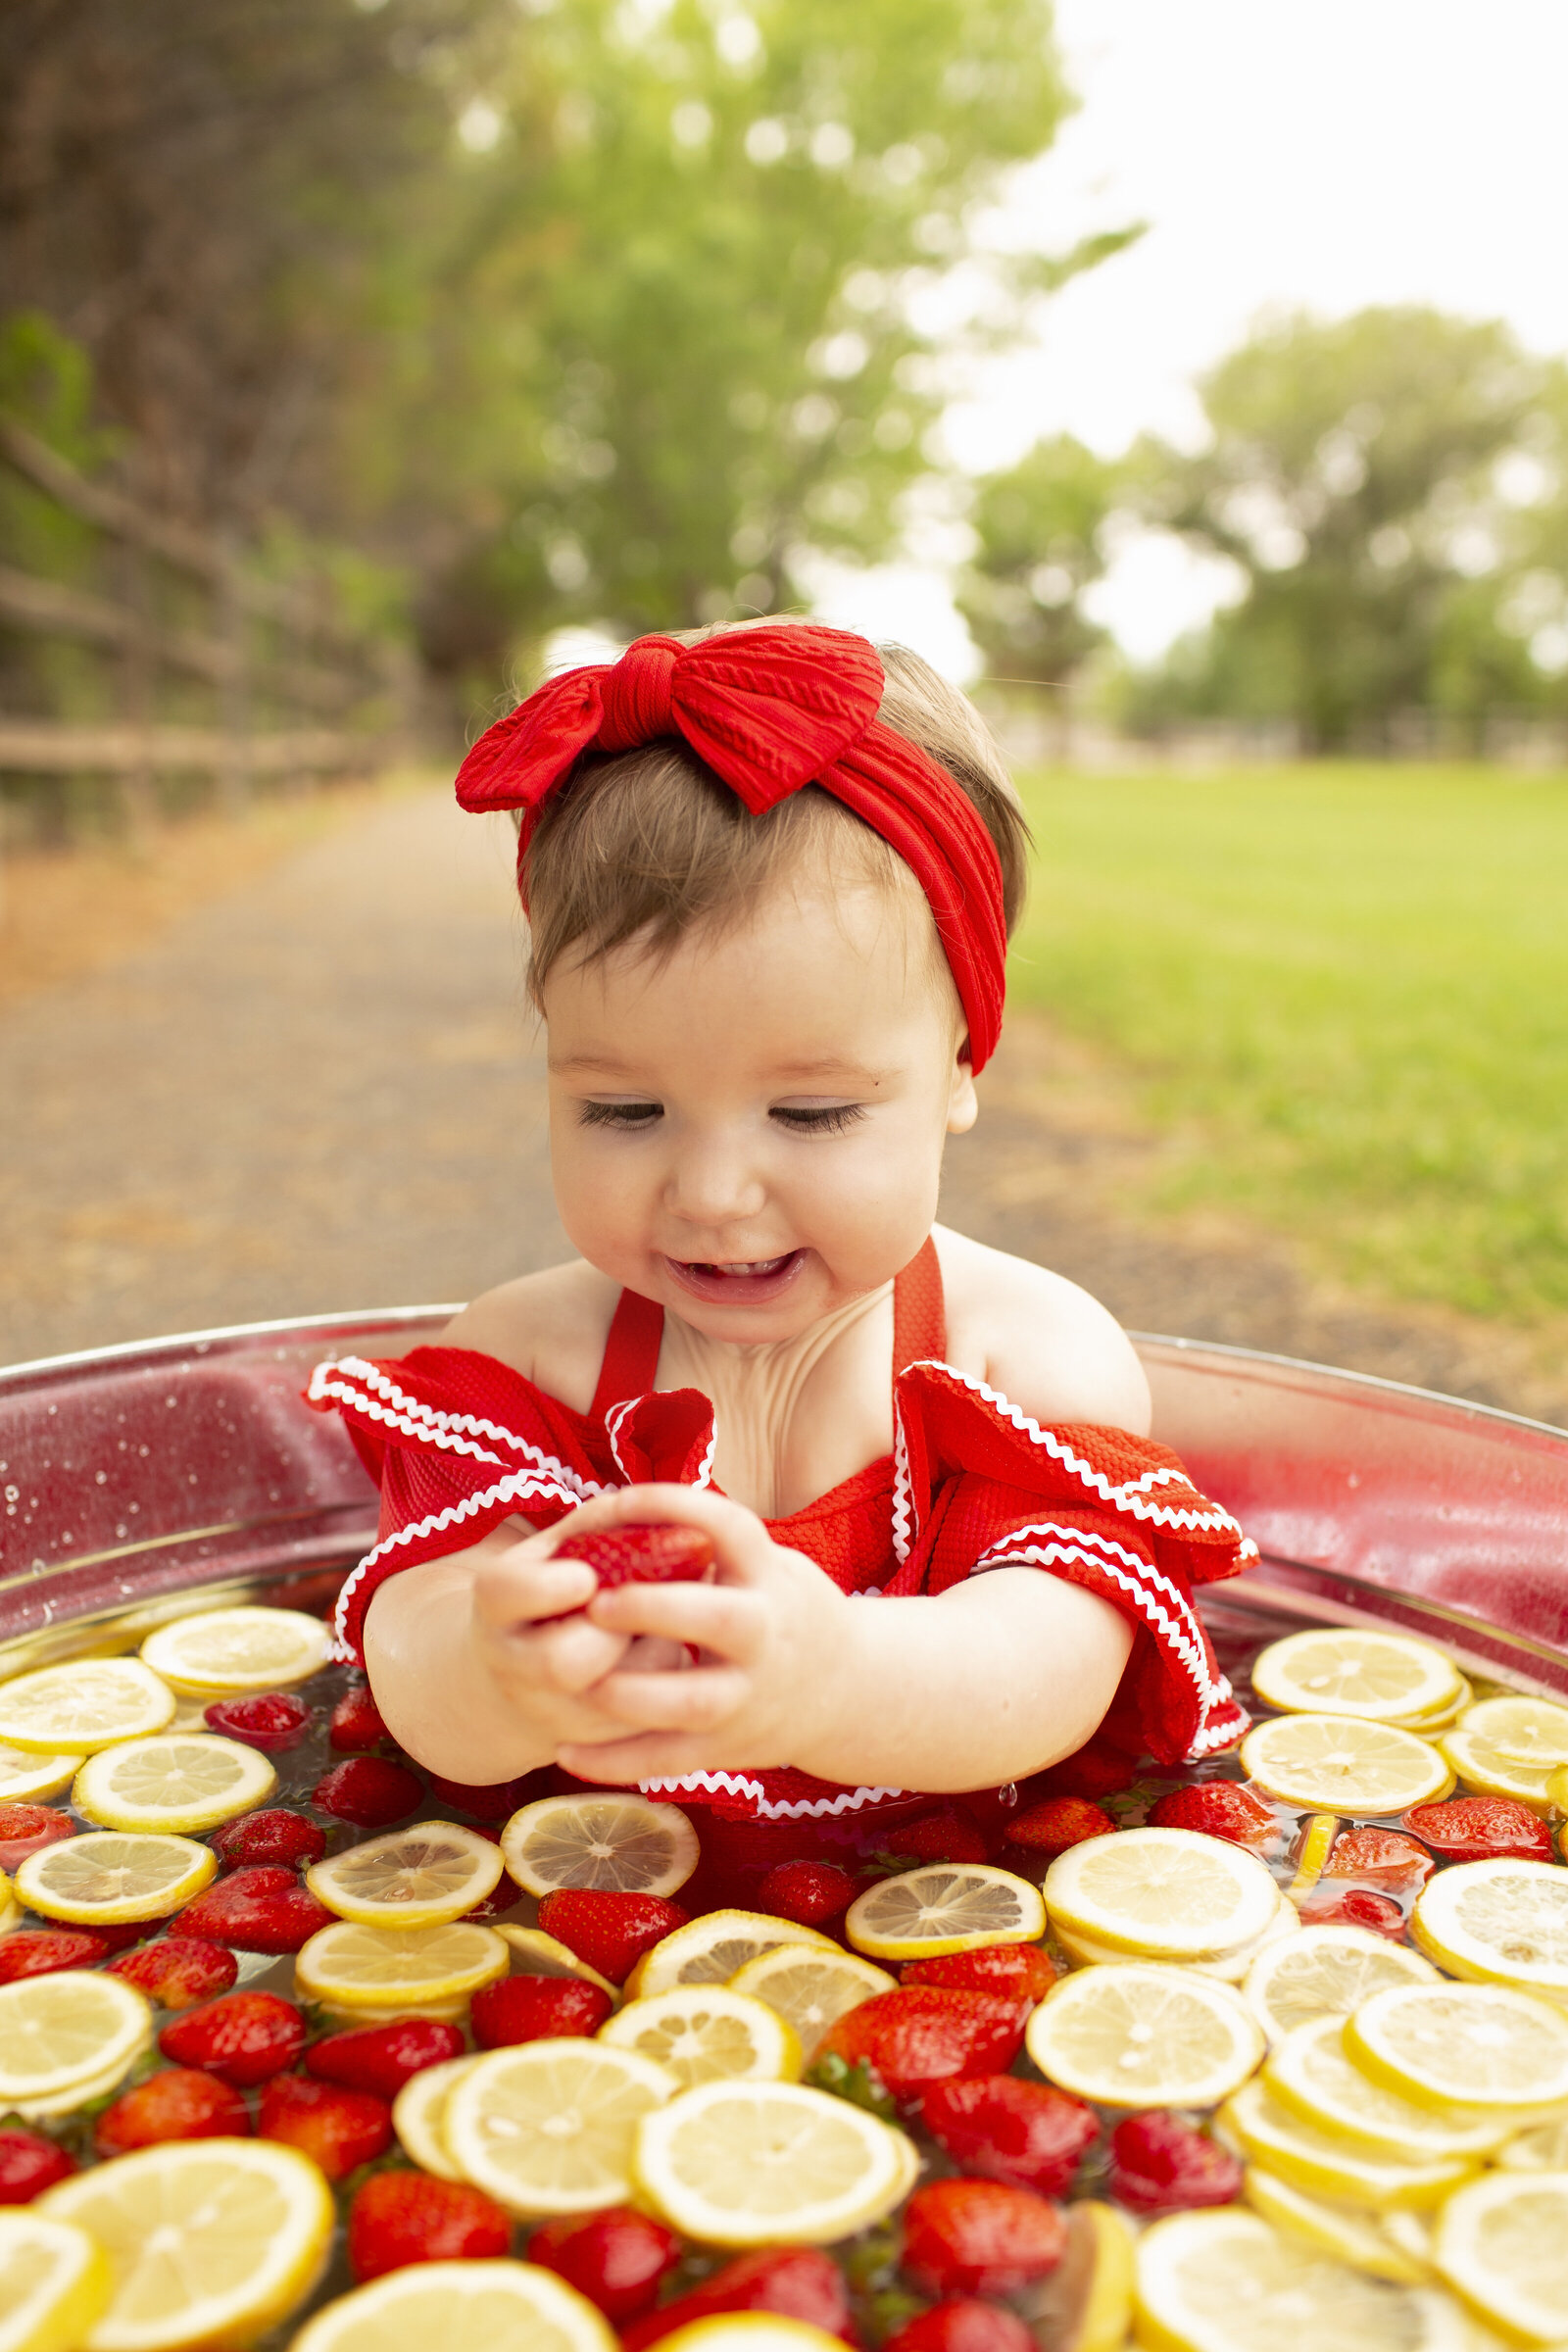 lemons-and-strawberries-one-year-old-fruit-bath-in-the-park-NM